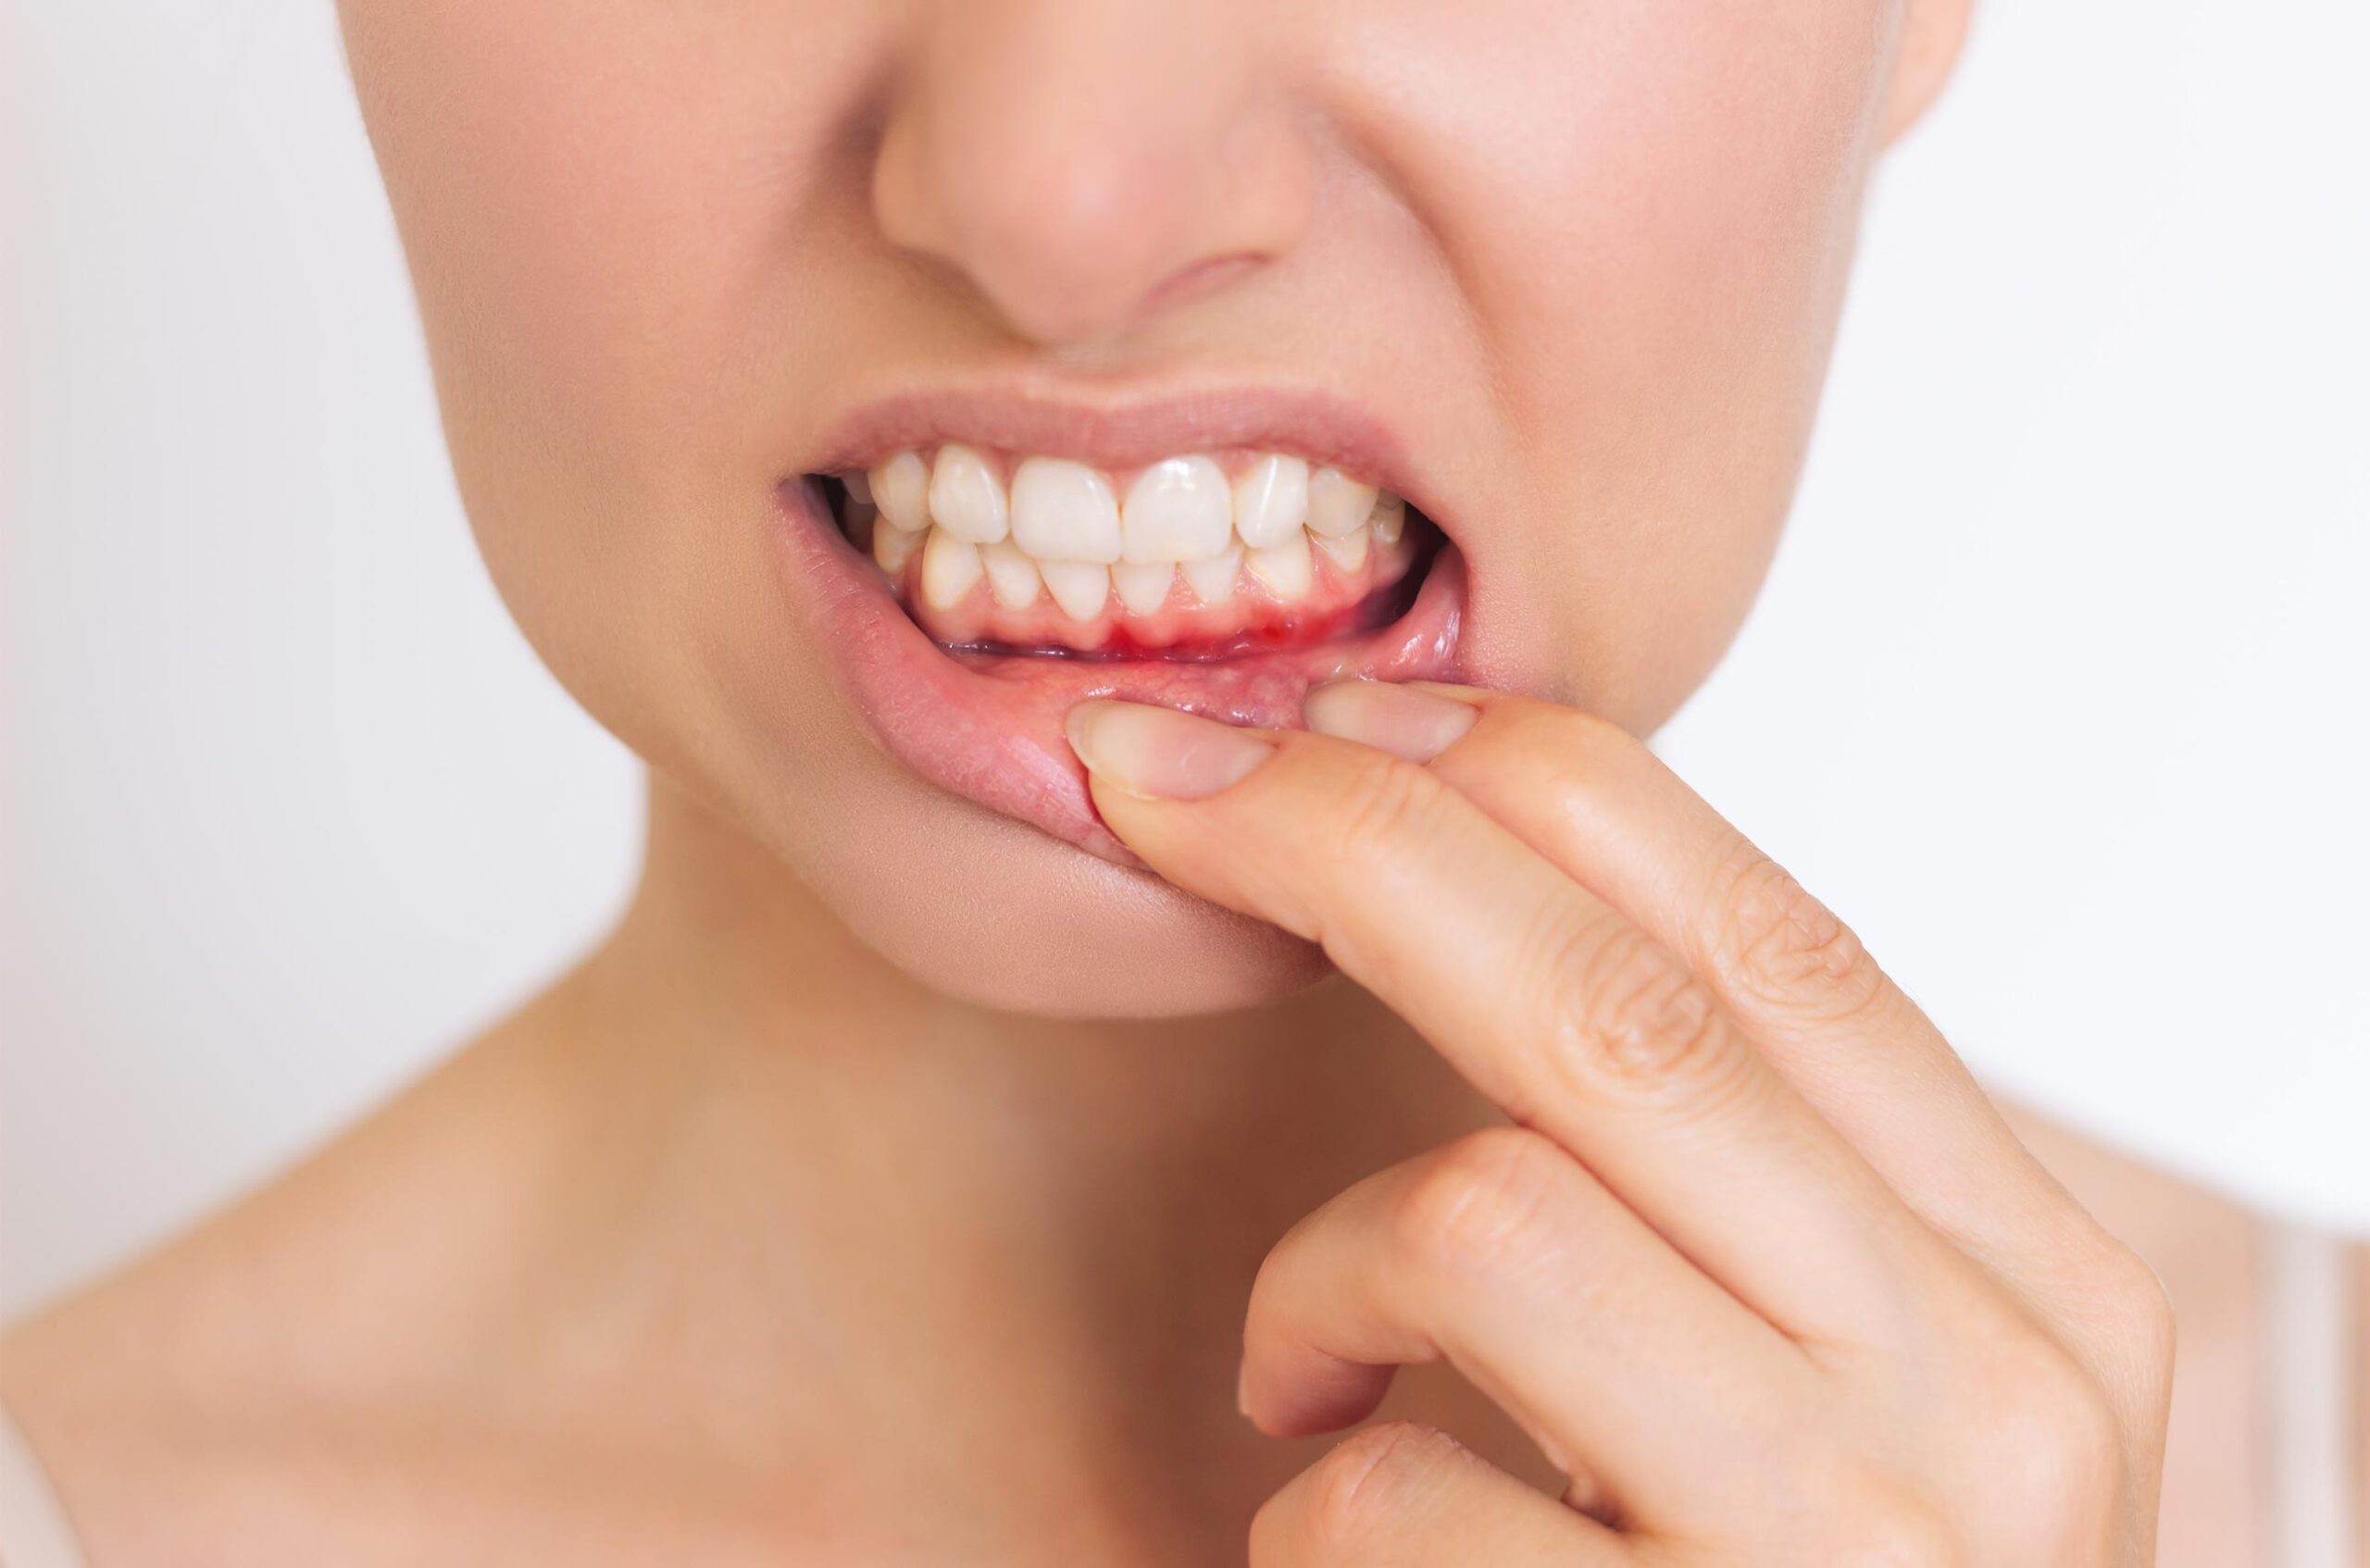 5 Early Warning Signs of Gum Disease You Shouldn’t Ignore